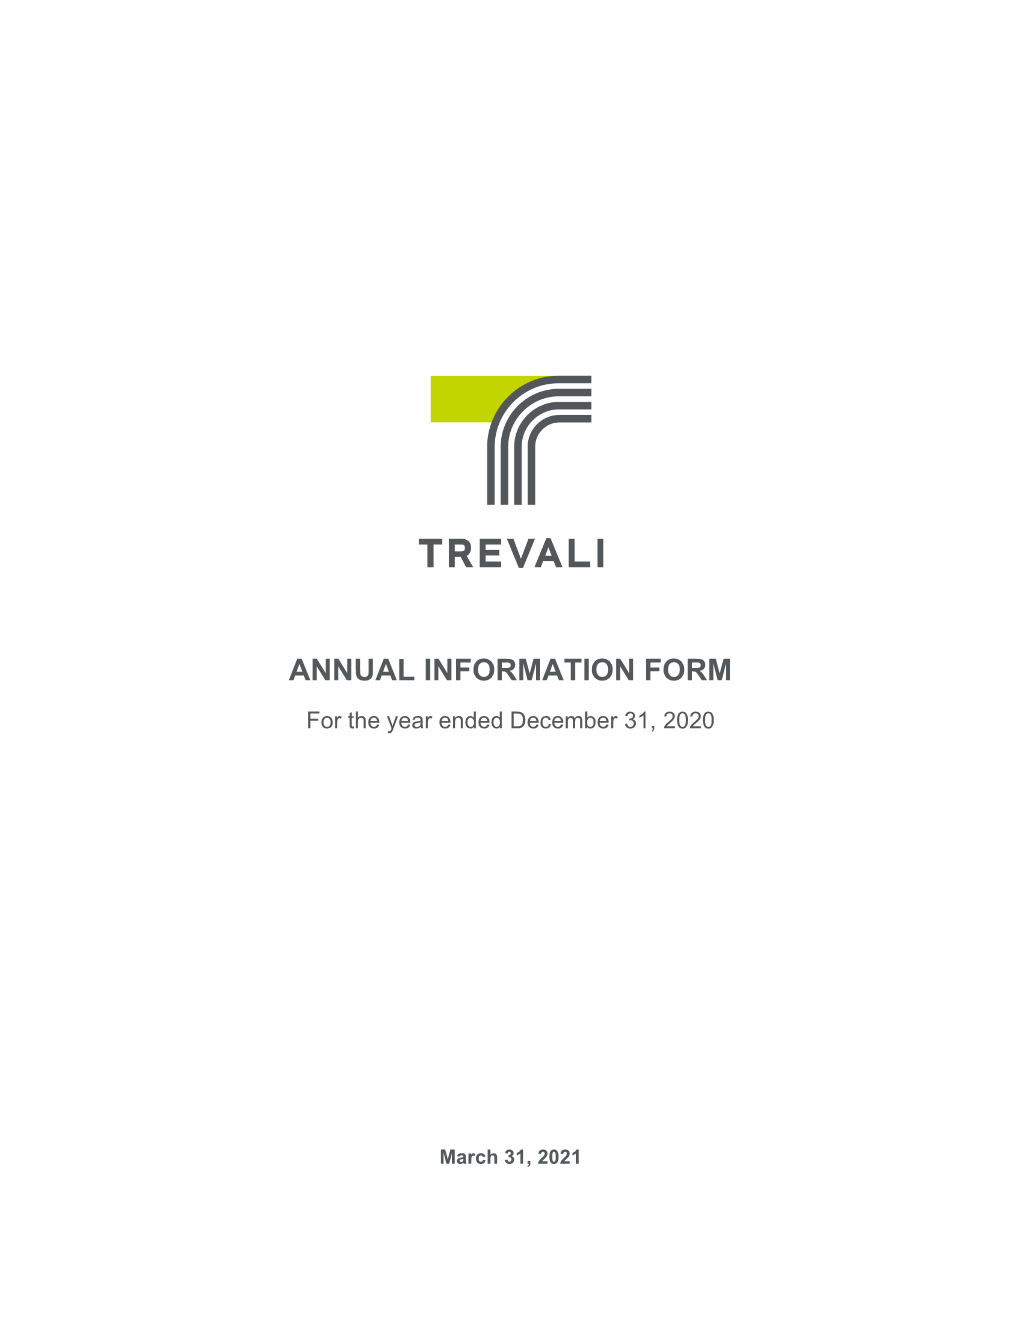 ANNUAL INFORMATION FORM for the Year Ended December 31, 2020